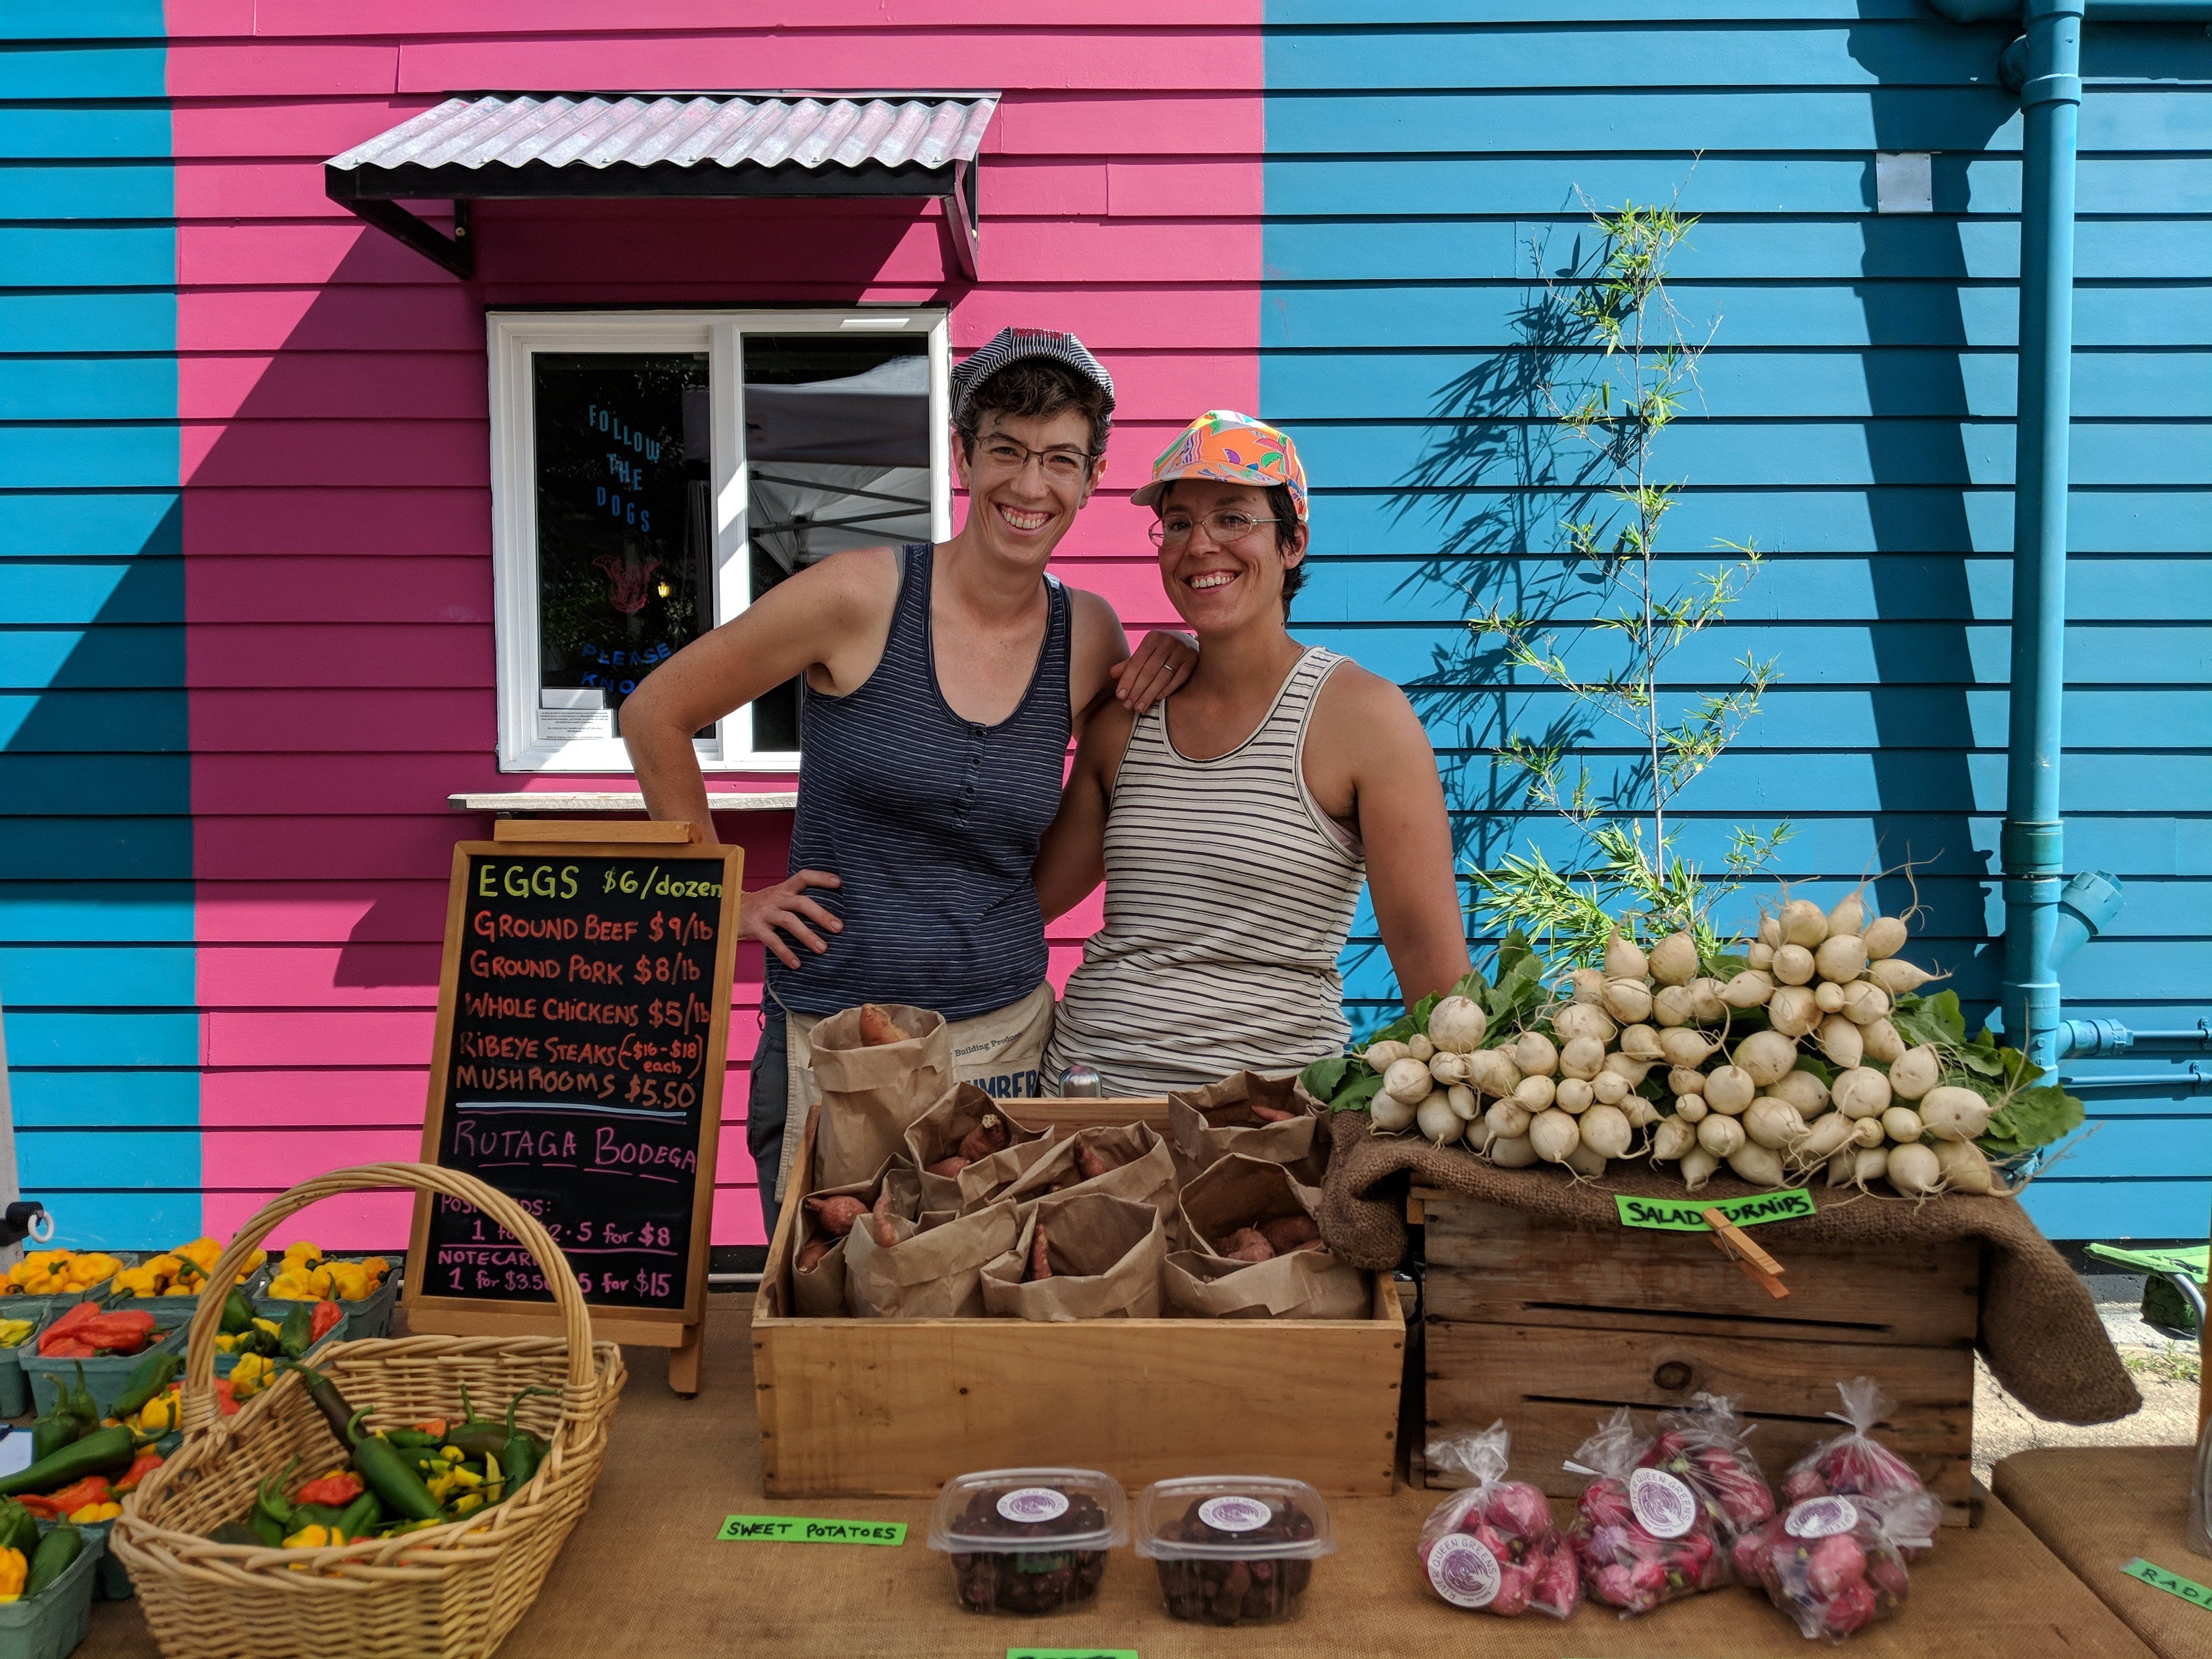 Previous Happening: Excited for the first Farm Share!